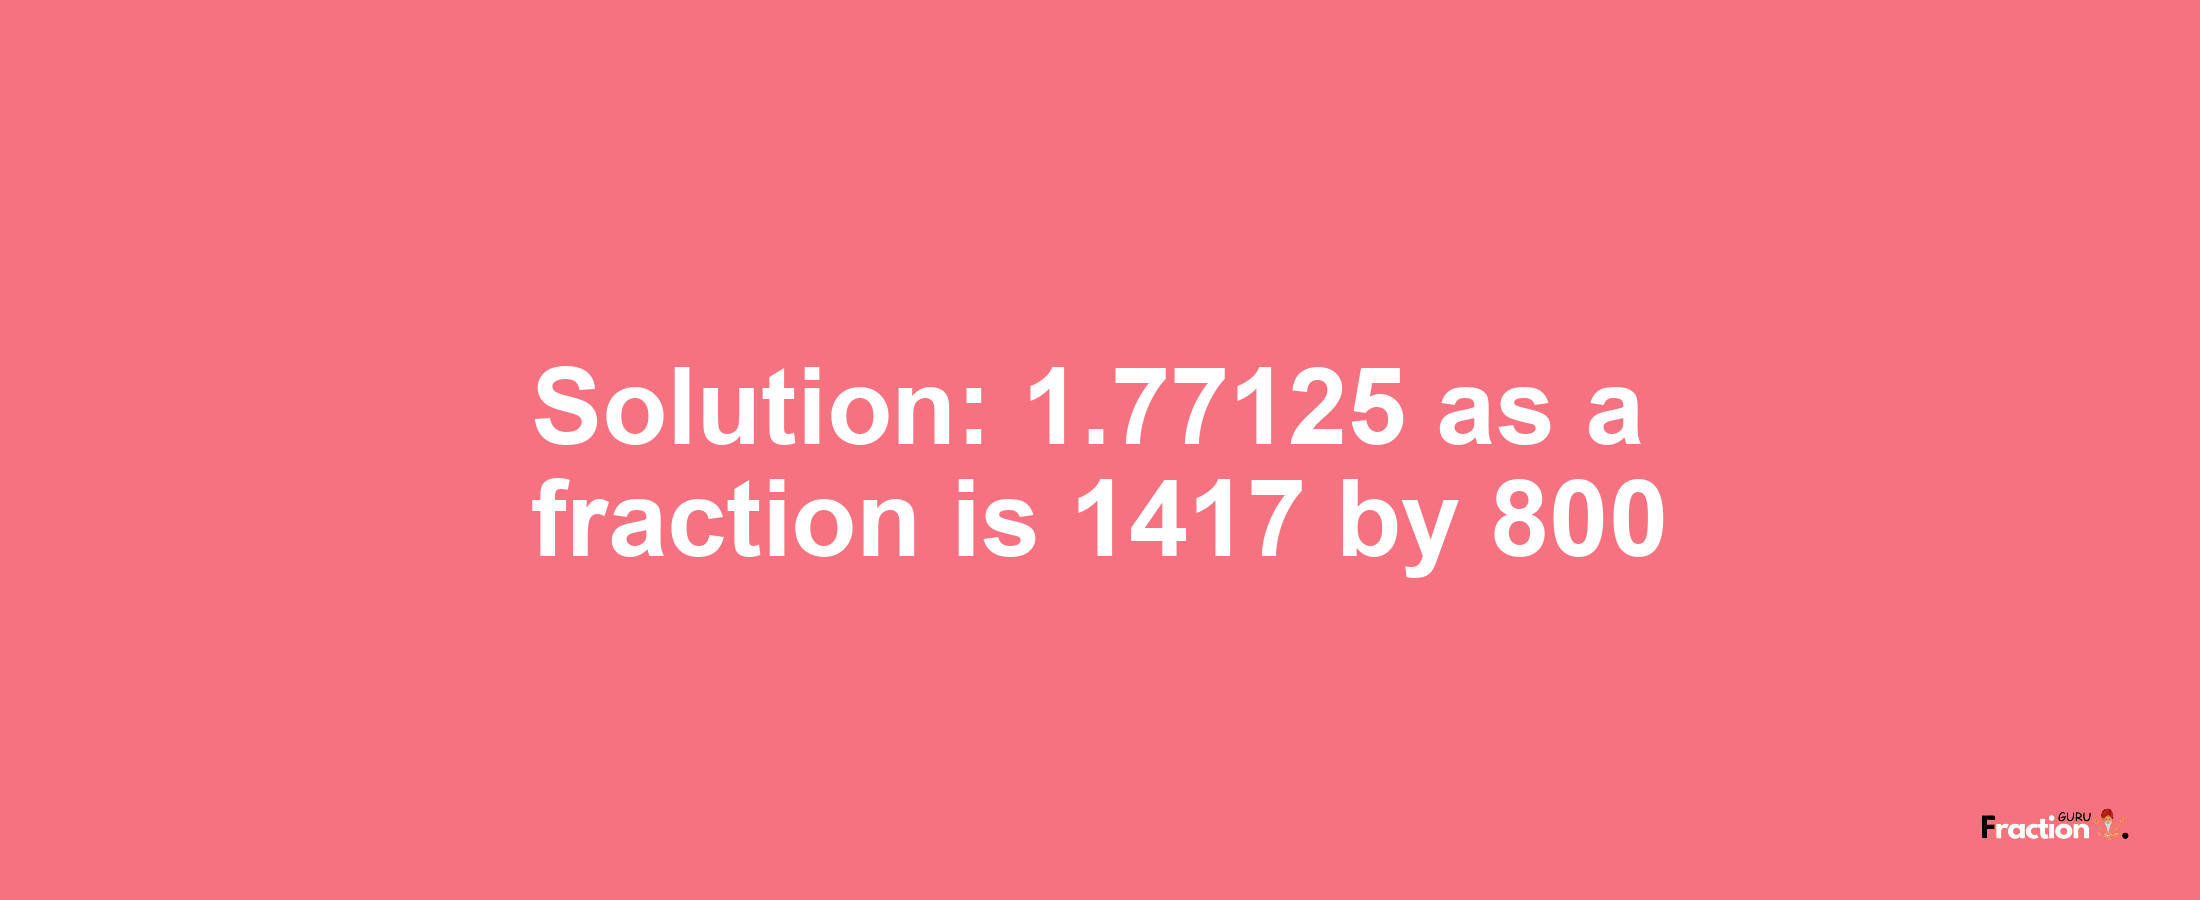 Solution:1.77125 as a fraction is 1417/800